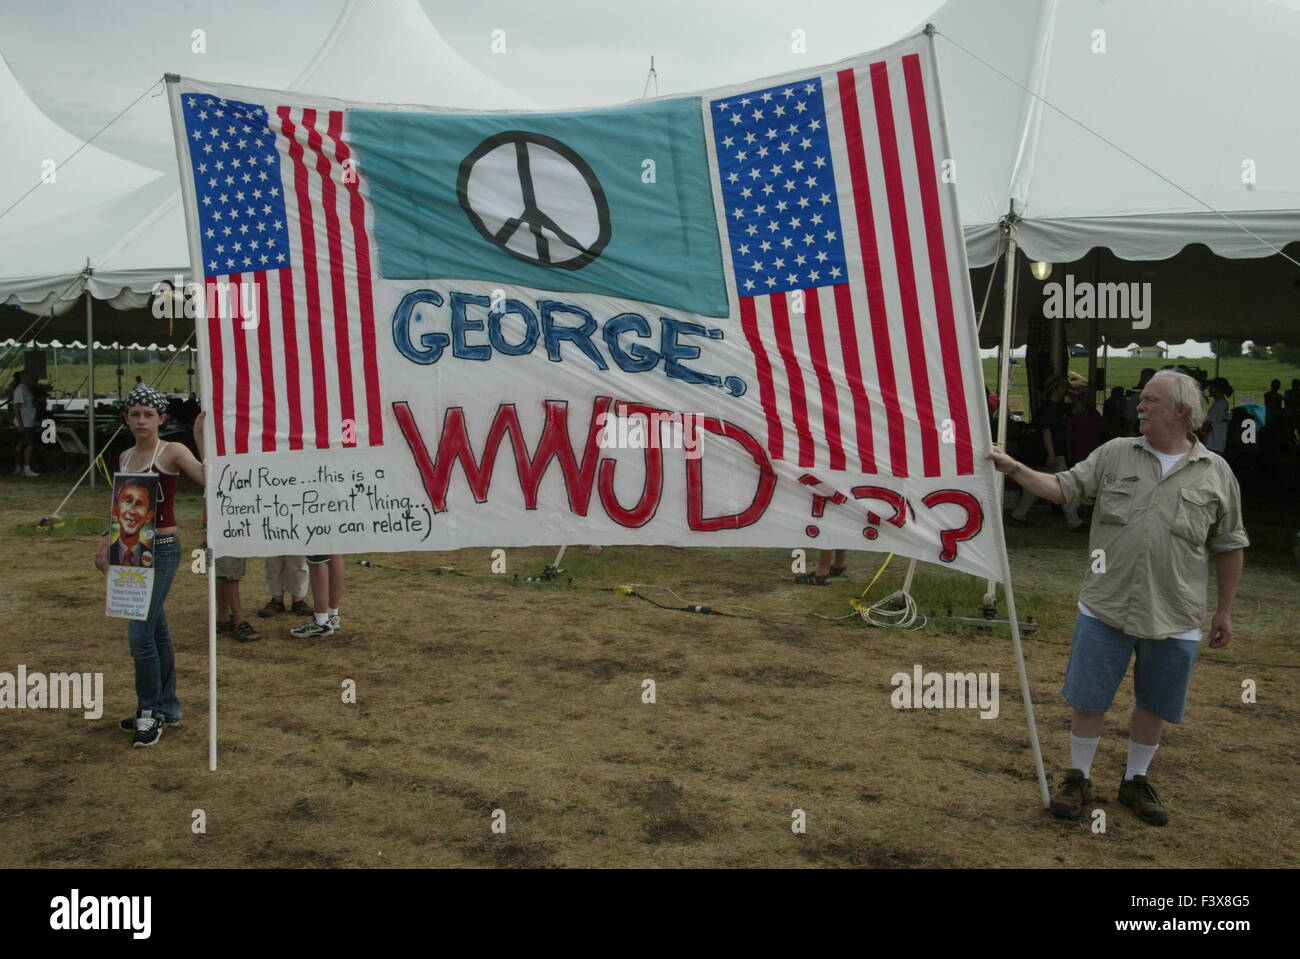 Anti-War protesters, along with activist Cindy Sheehan, gather in Crawford, Texas to protest against George W Bush. Sheehan had asked to talk to Bush about the death of her son Casey Sheehan during the war in Iraq, but Bush refused to talk to her. Sheehan vowed to camp out until Bush talked to her, but he never did. Stock Photo